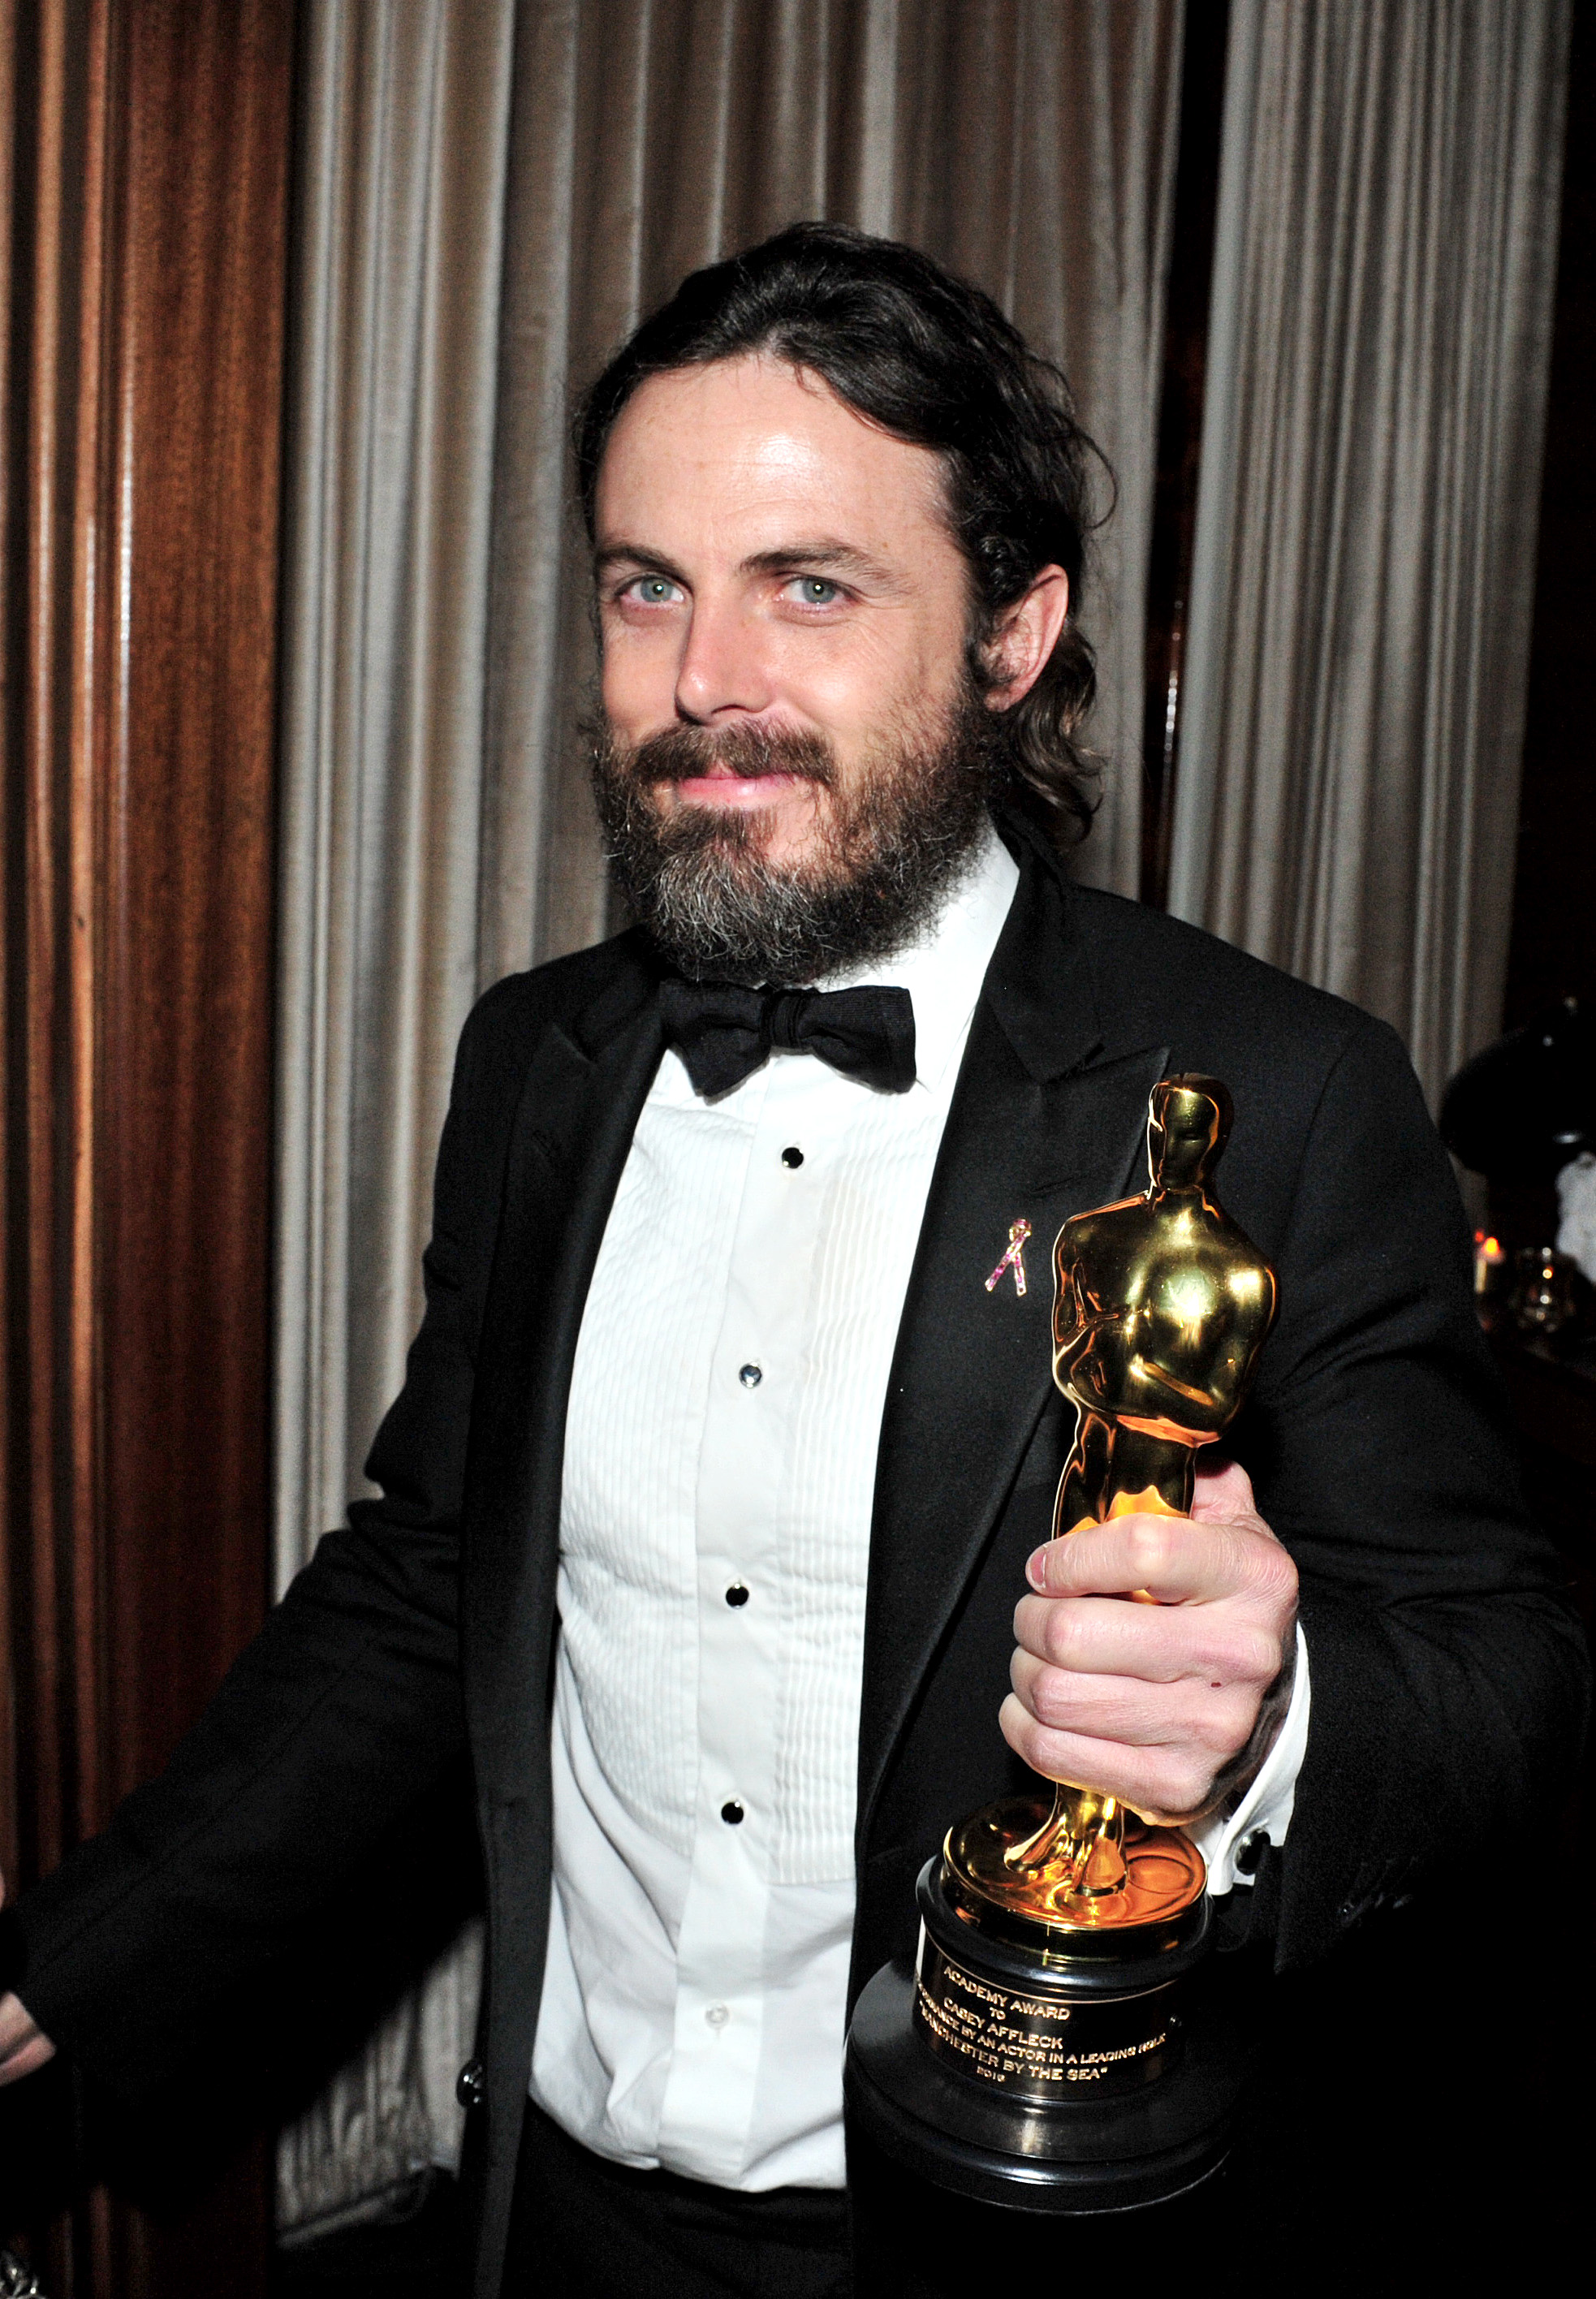 WEST HOLLYWOOD, CA - FEBRUARY 26: Actor Casey Affleck with his award for best actor in 'Manchester By The Sea' attends the Amazon Studios Oscar Celebration at Delilah on February 26, 2017 in West Hollywood, California. Jerod Harris/Getty Images/AFP